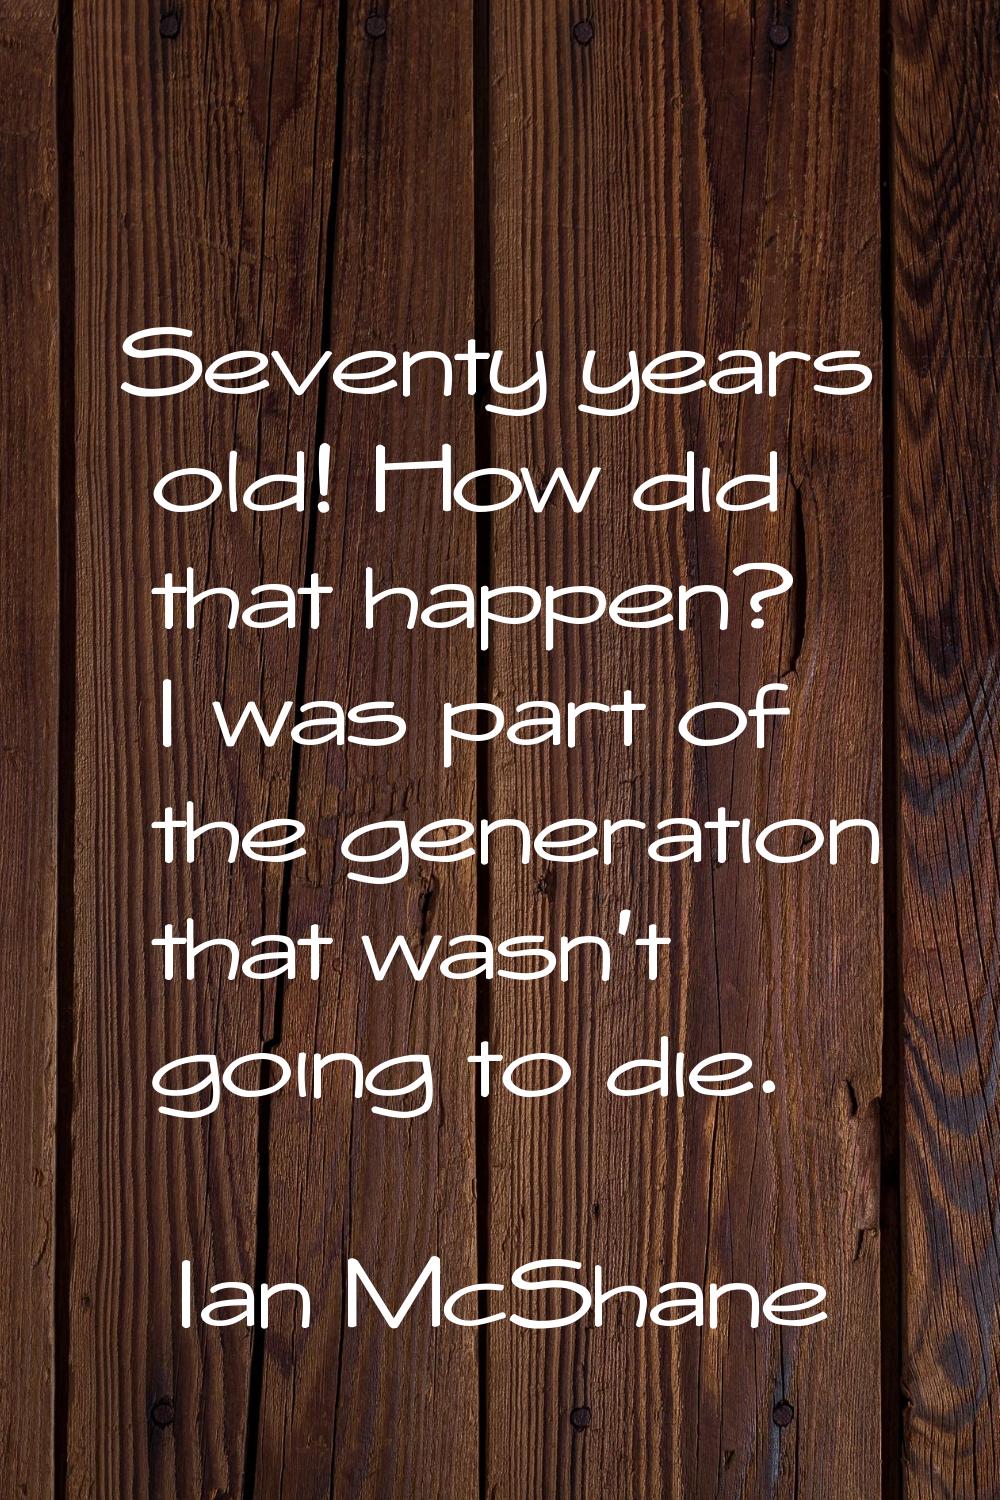 Seventy years old! How did that happen? I was part of the generation that wasn't going to die.